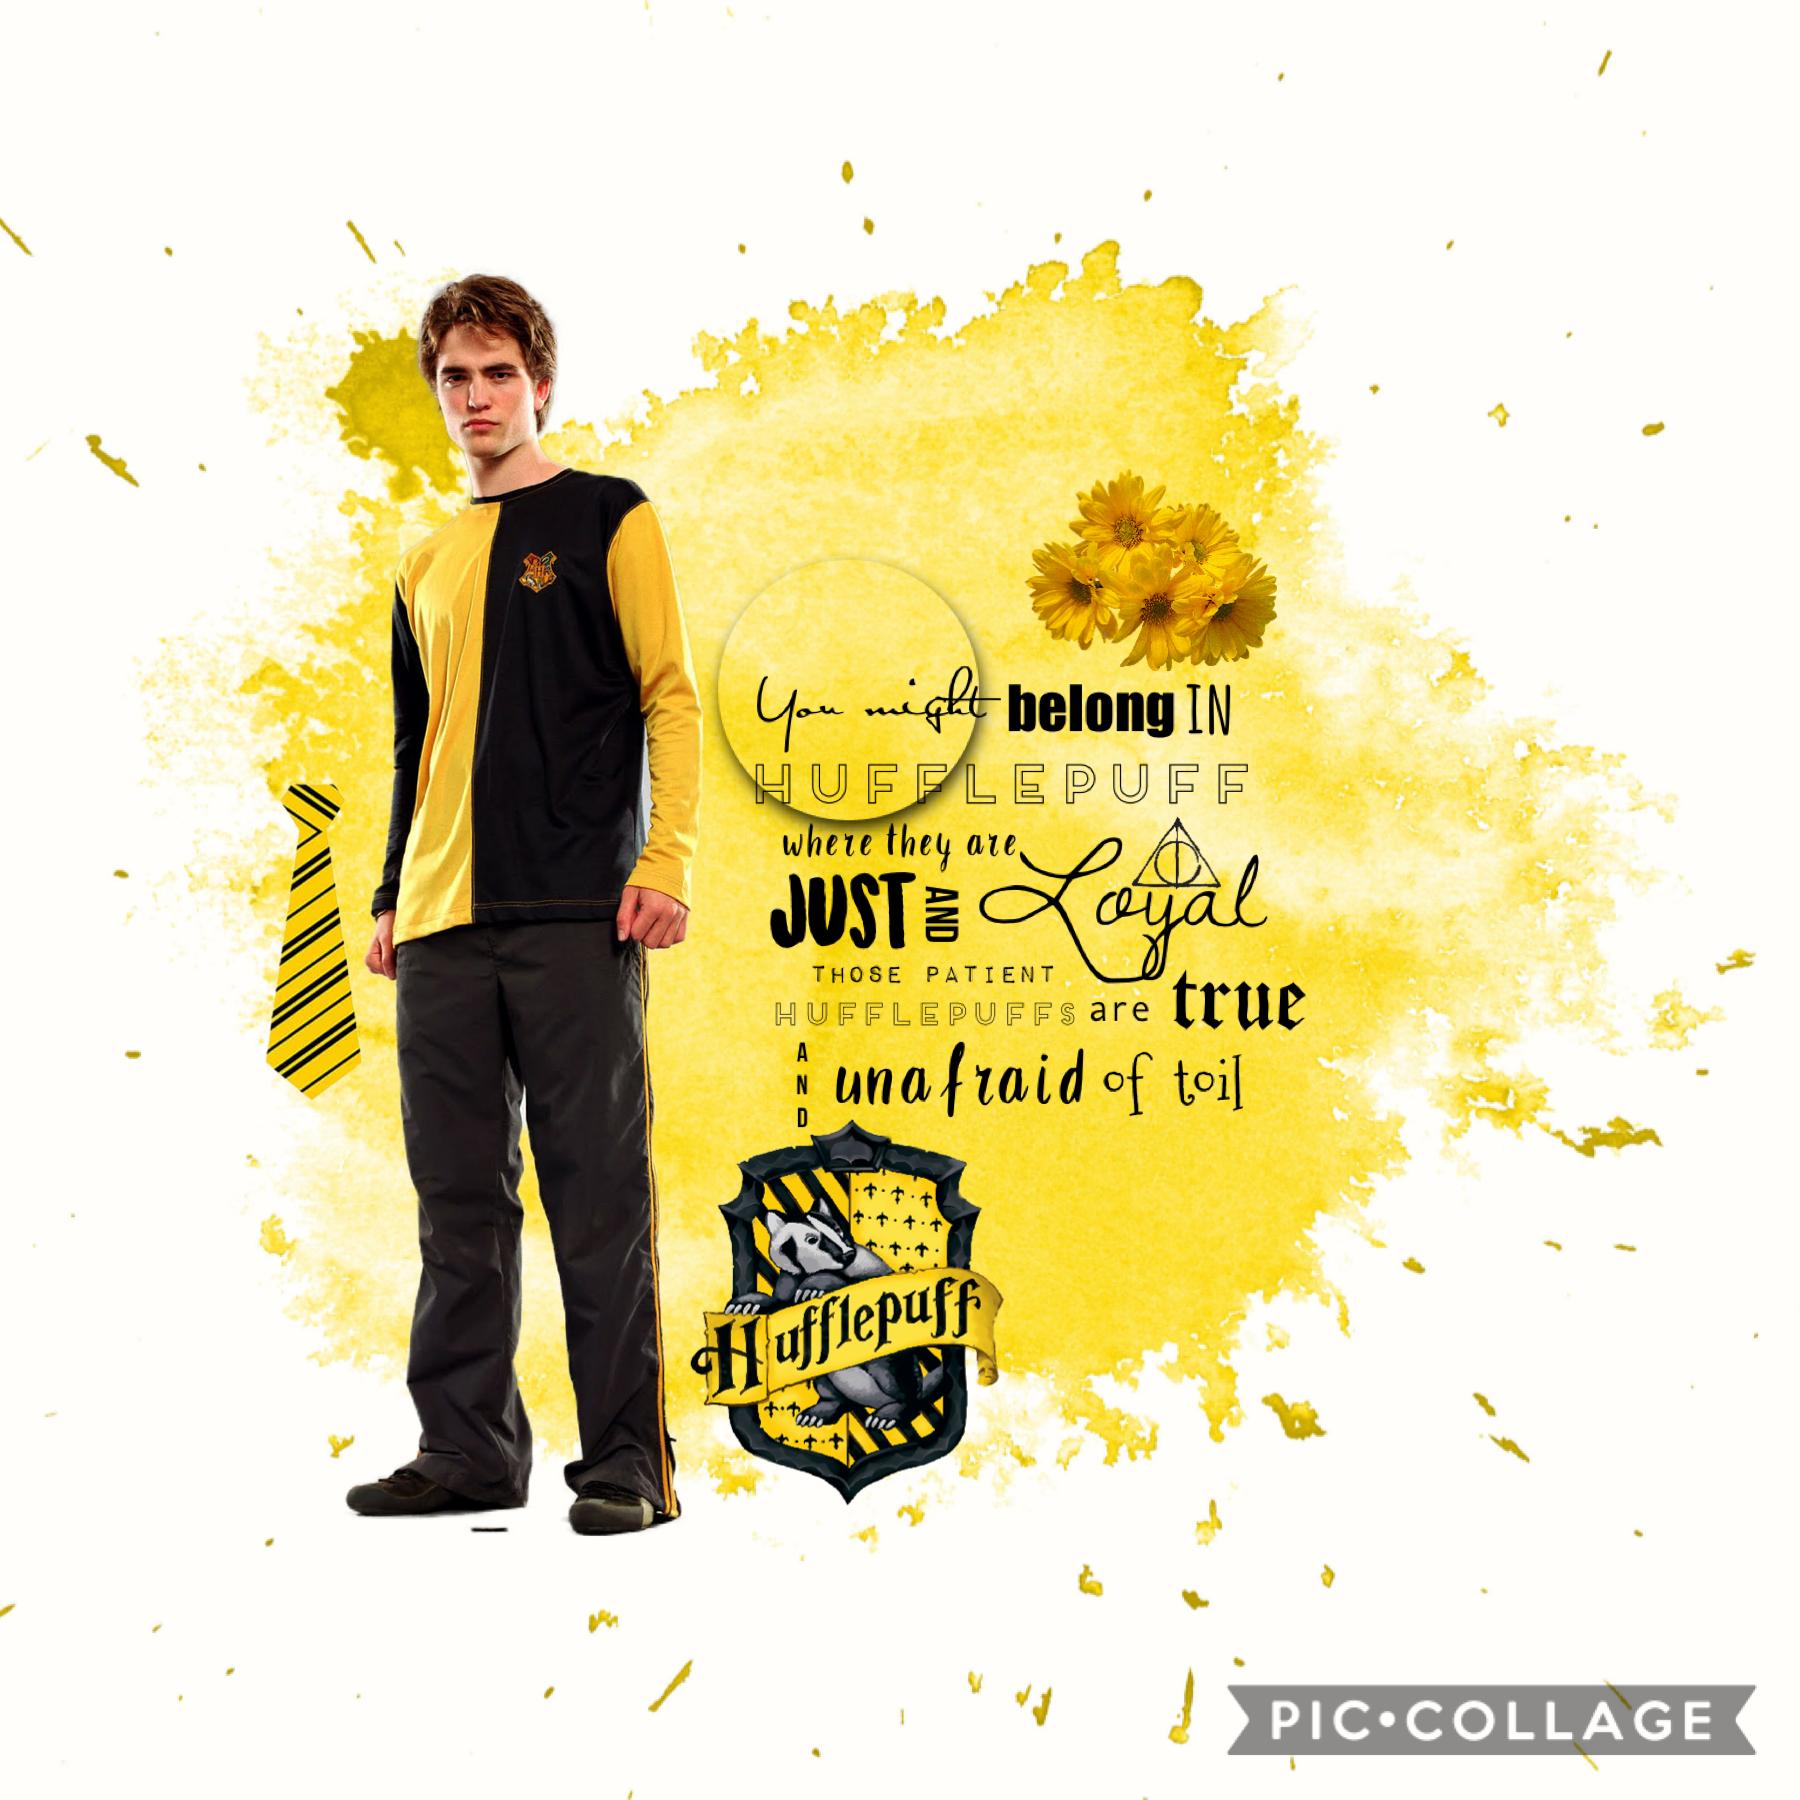 Thank you so much for 200 followers! Here you go Hufflepuffs!